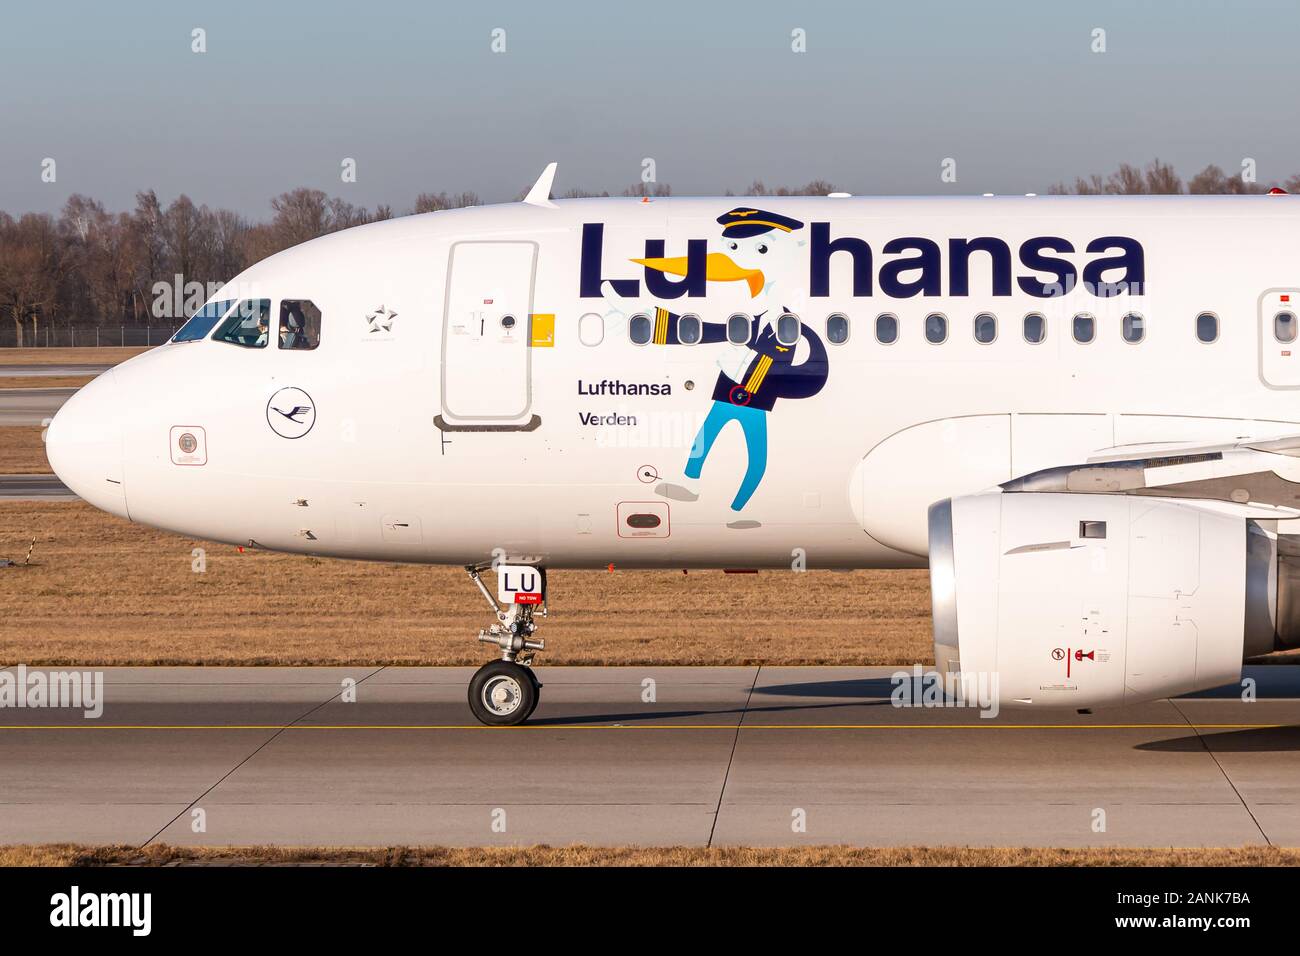 Munich, Germany - January 16, 2020: Lufthansa Airbus A319 airplane at Munich airport (MUC) in Germany. Airbus is an aircraft manufacturer from Toulous Stock Photo